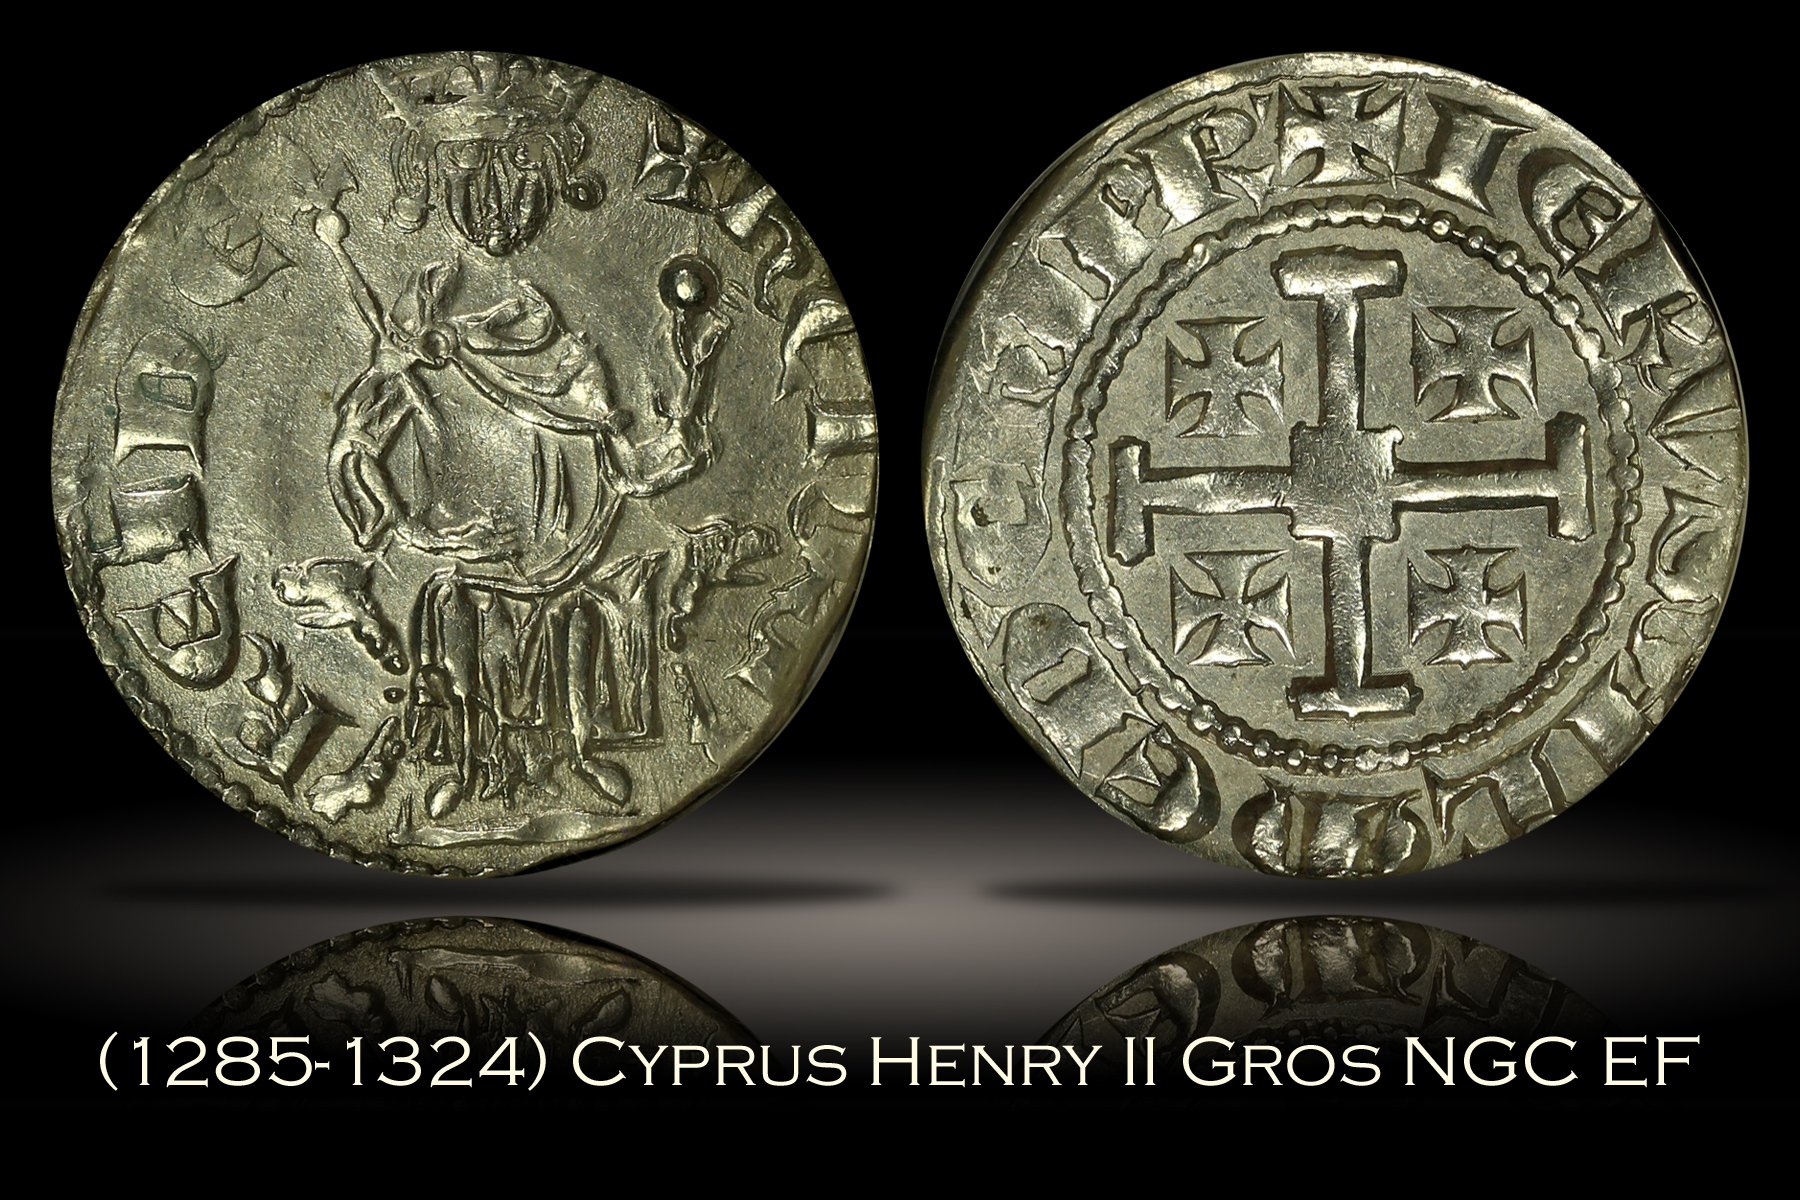 1285-1324 Cyprus Henry II Gros Coin of the Crusades NGC EF